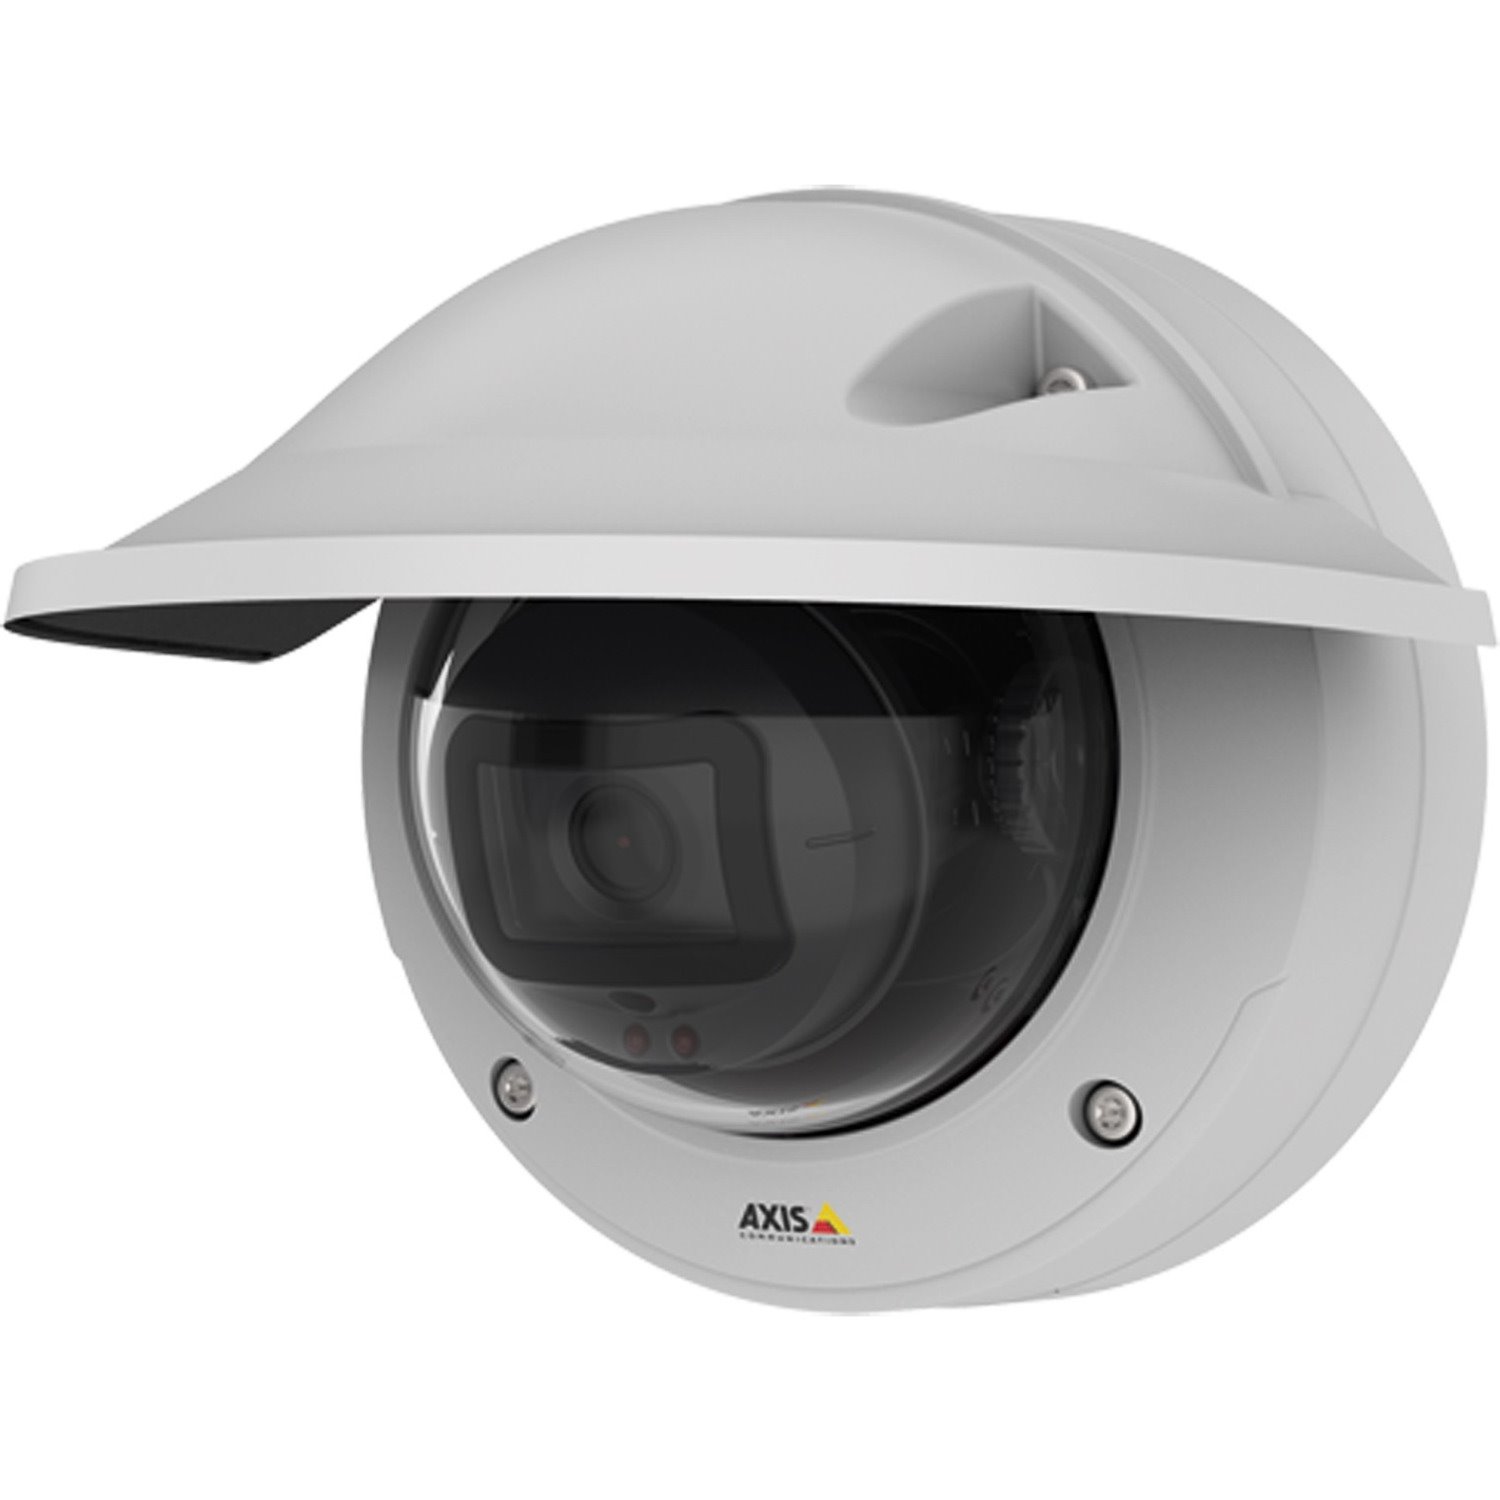 AXIS M3205-LVE Indoor/Outdoor Full HD Network Camera - Color - Dome - White - TAA Compliant